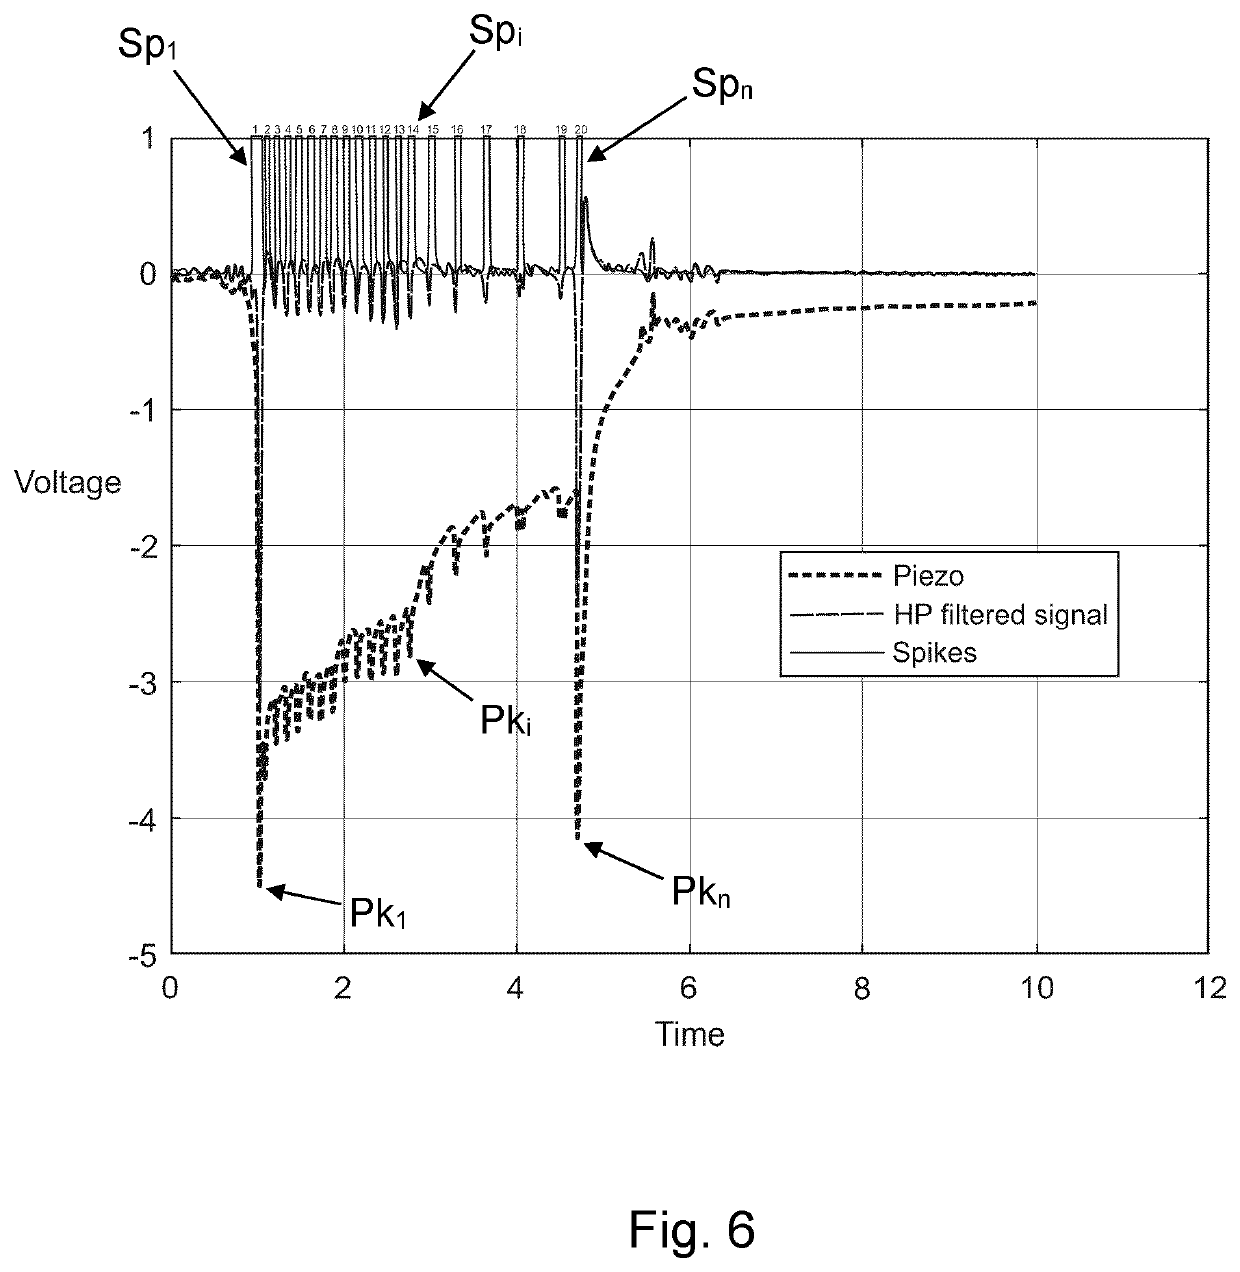 Drug delivery device with means for determining expelled dose